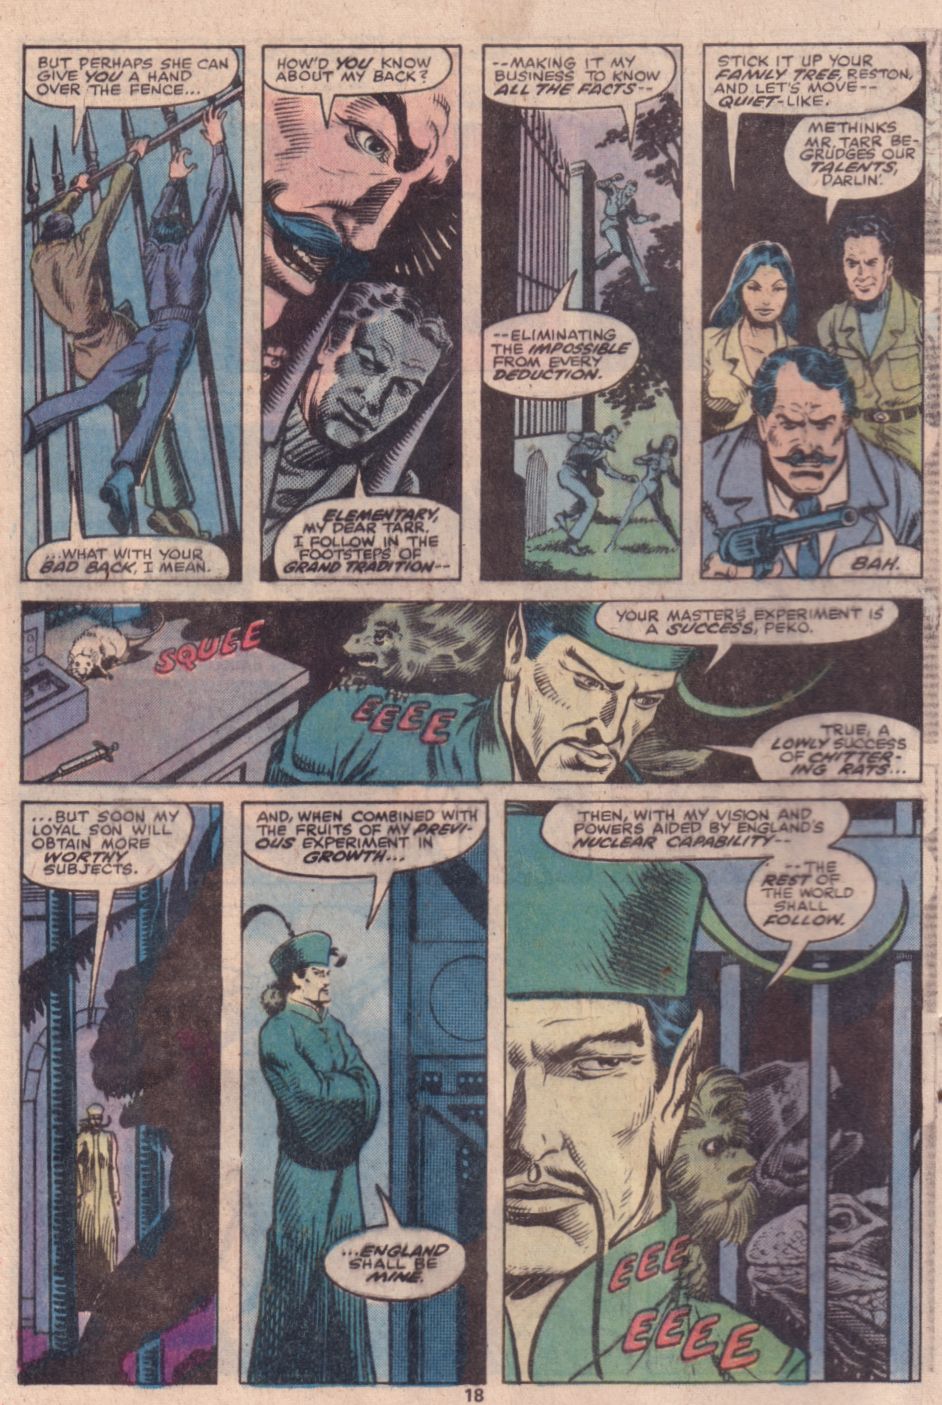 What If? (1977) issue 16 - Shang Chi Master of Kung Fu fought on The side of Fu Manchu - Page 15